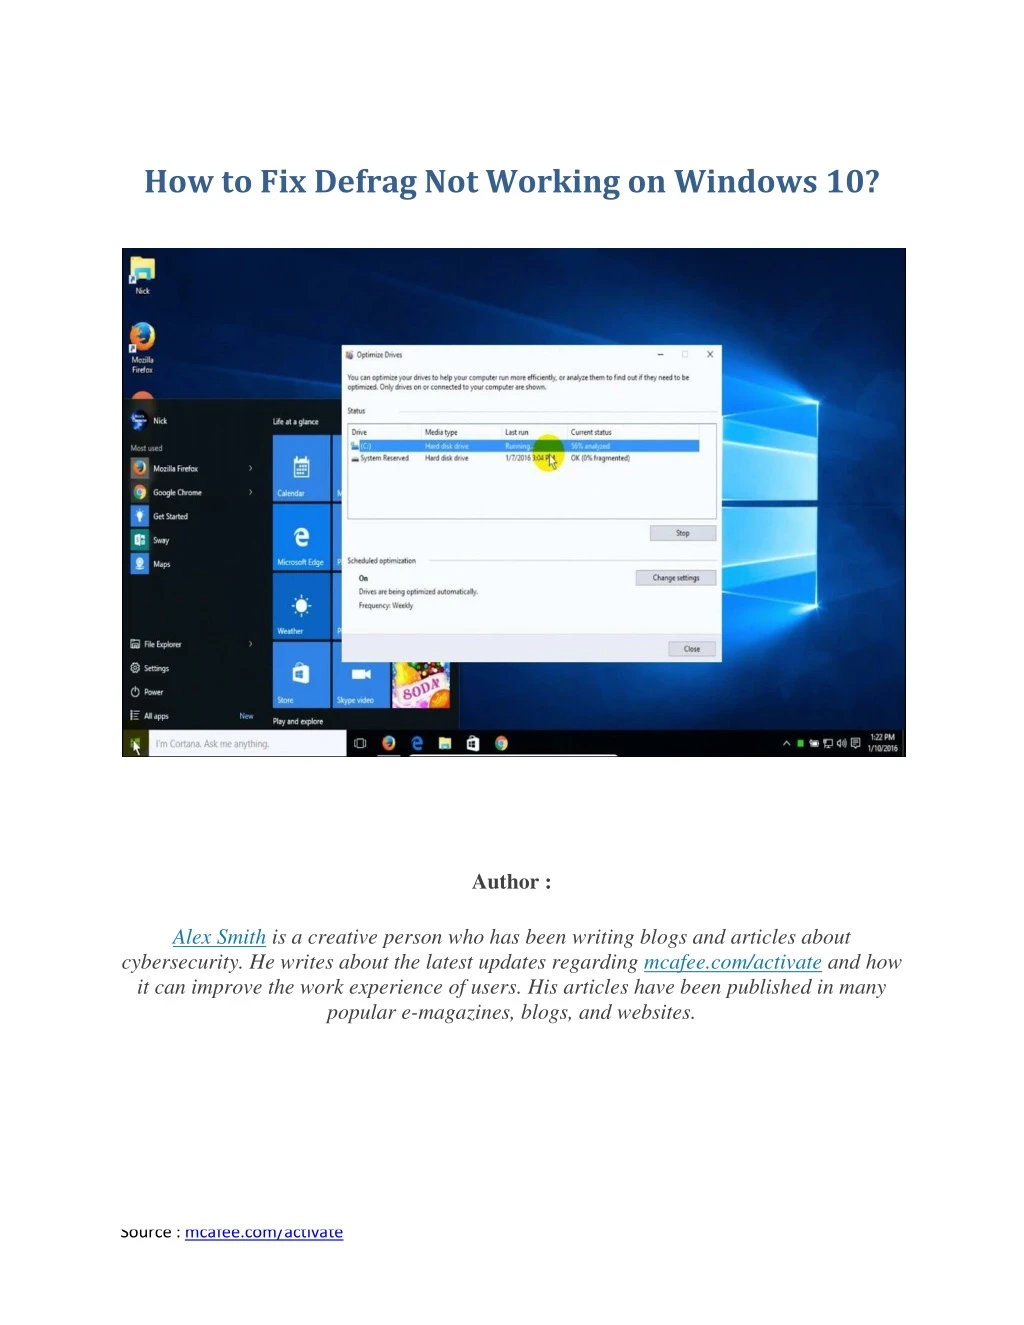 how to fix defrag not working on windows 10